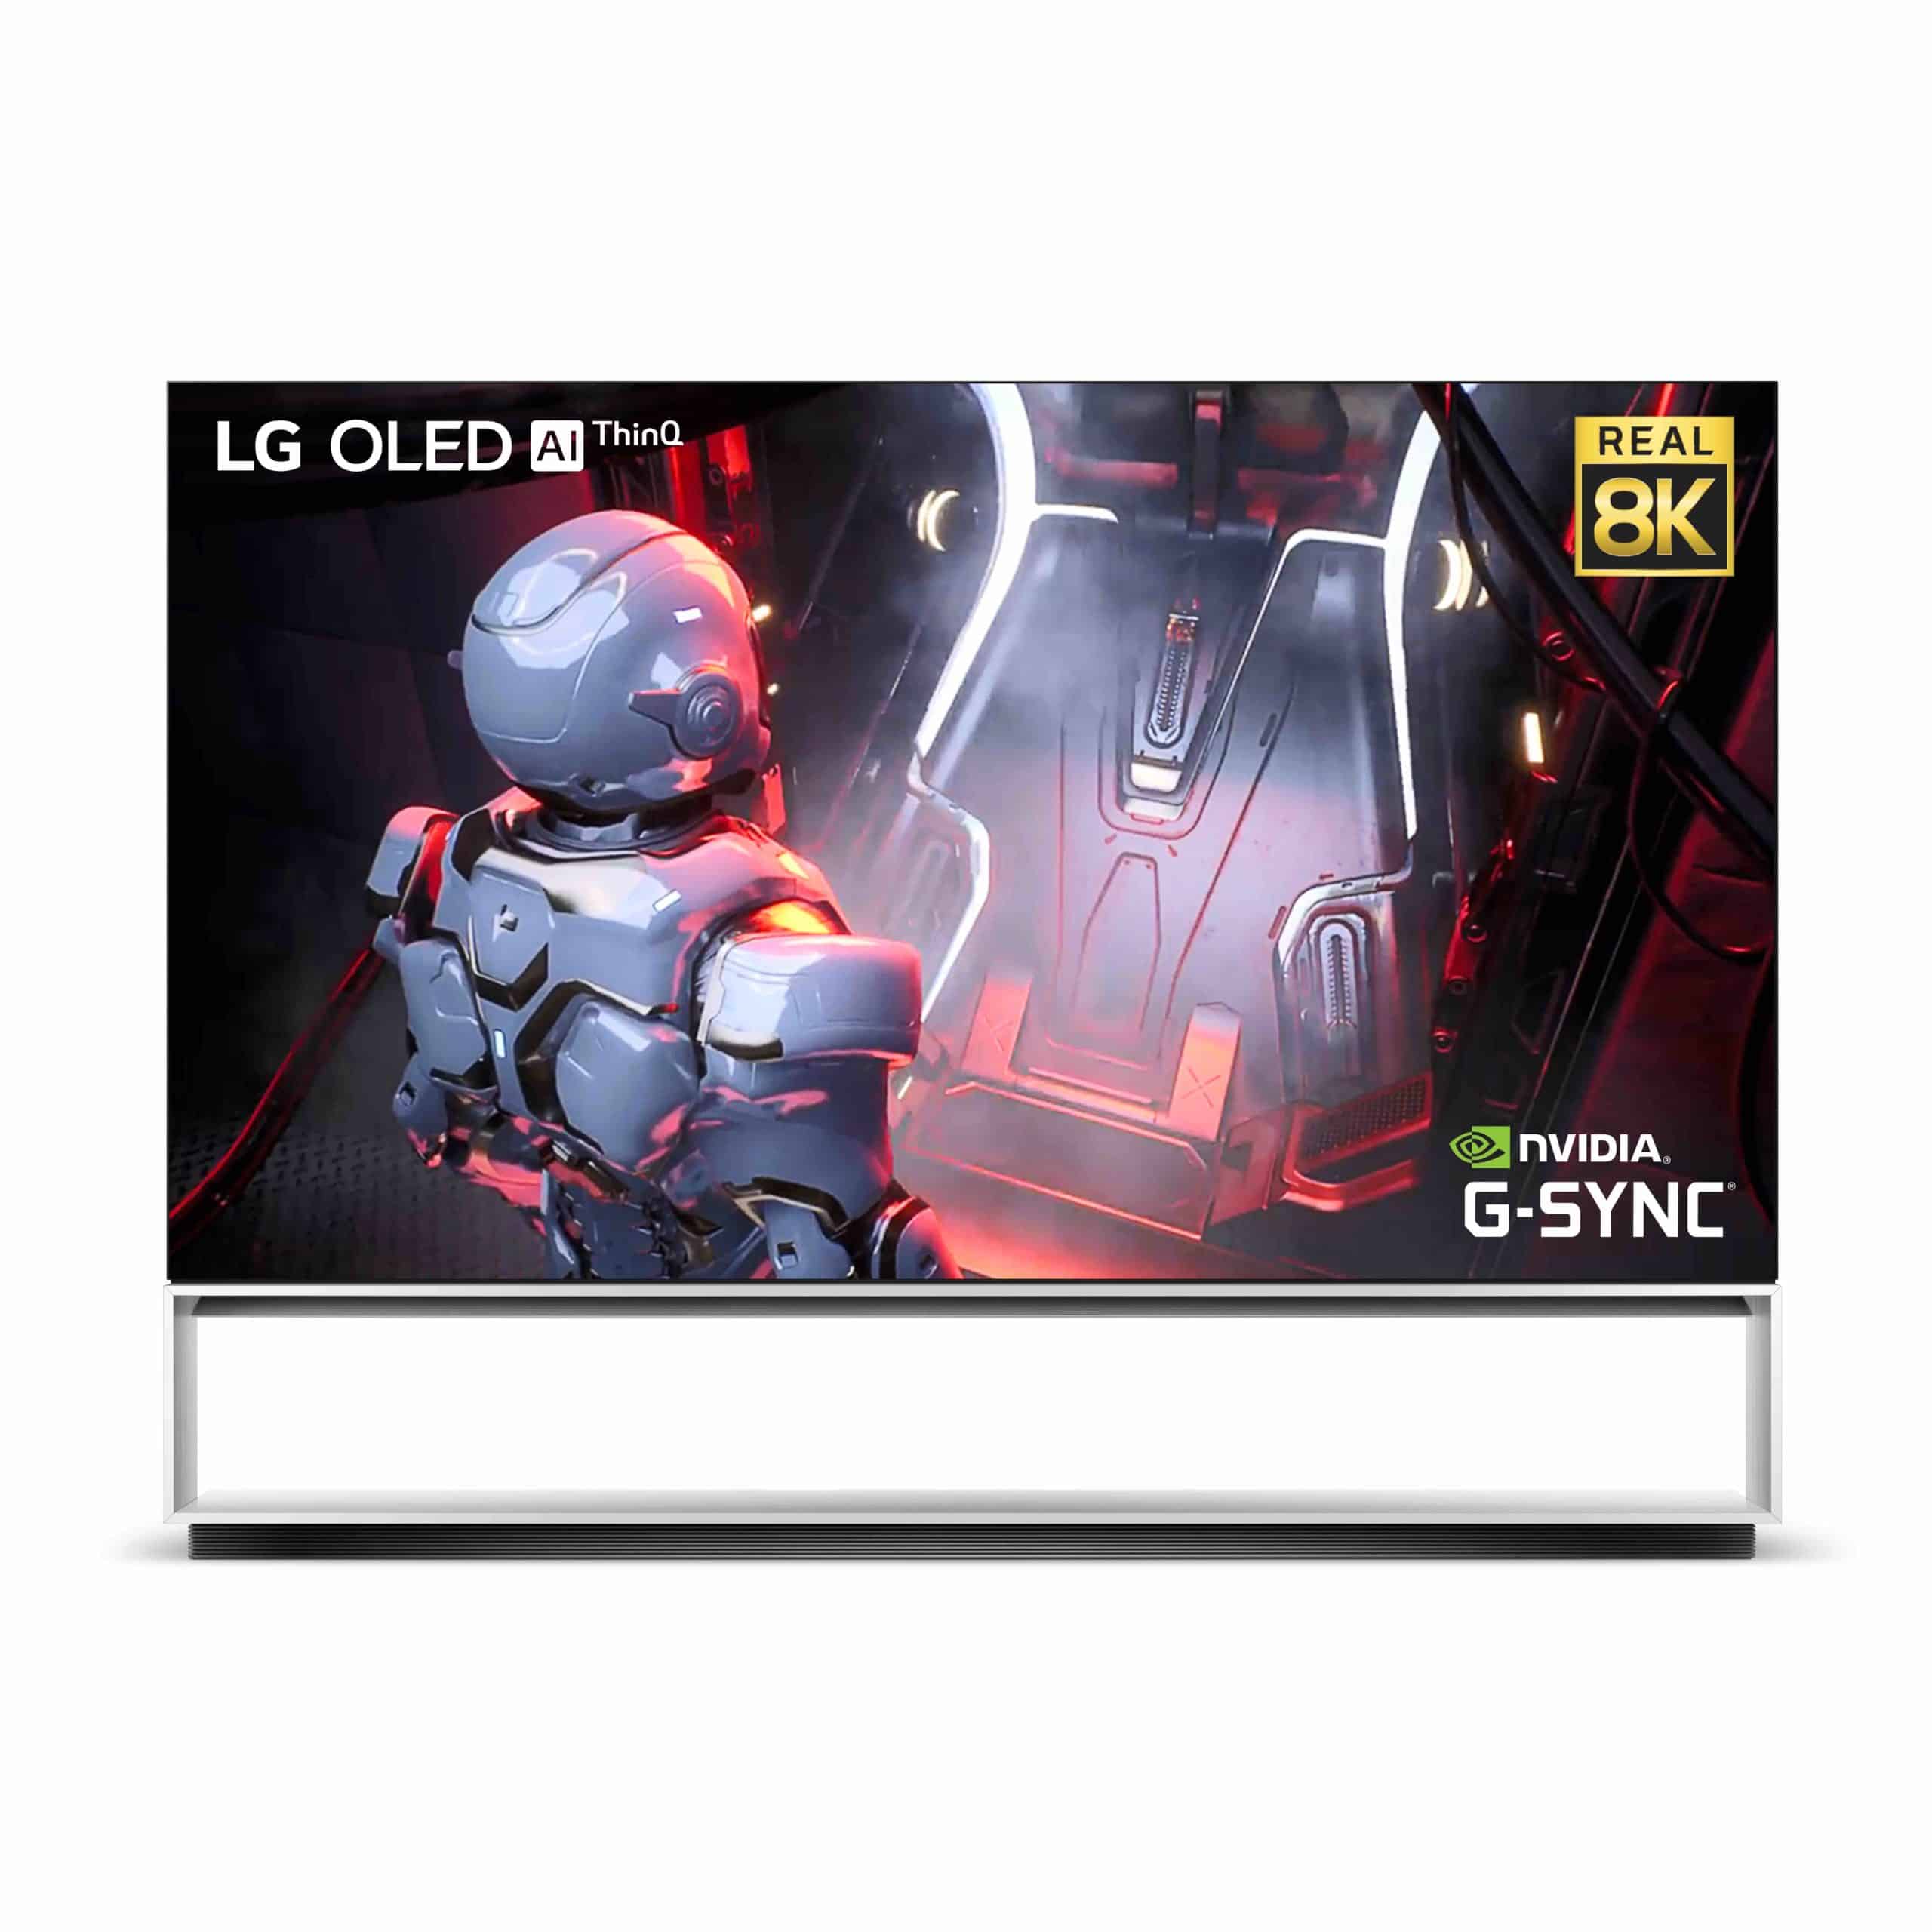 LG announces OLED TVs with advanced Gaming Capabilities